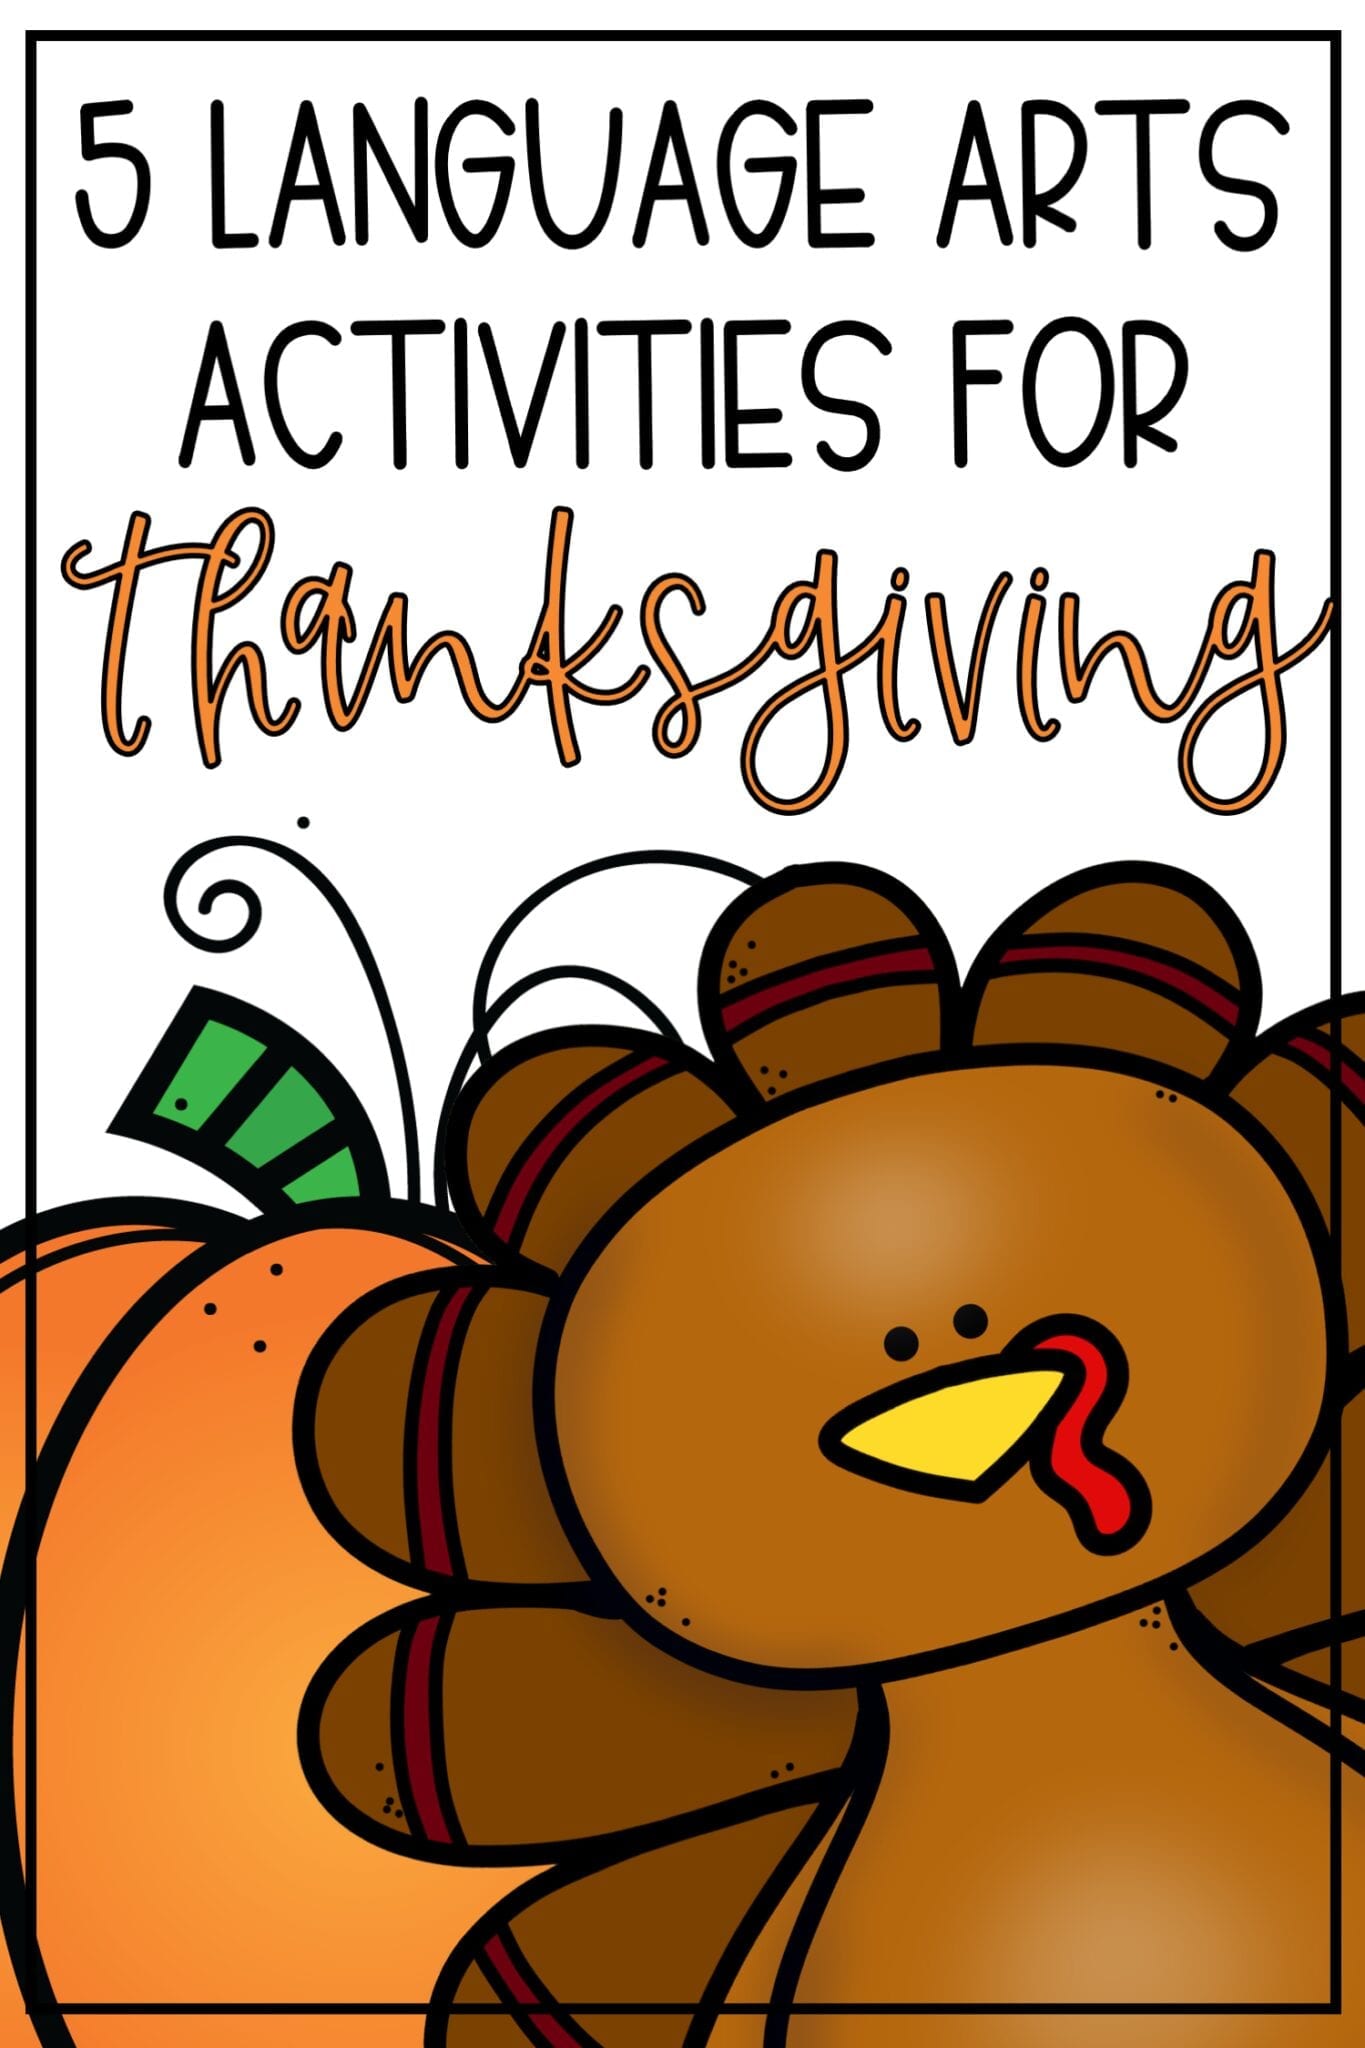 5 Language Arts Activities for Thanksgiving